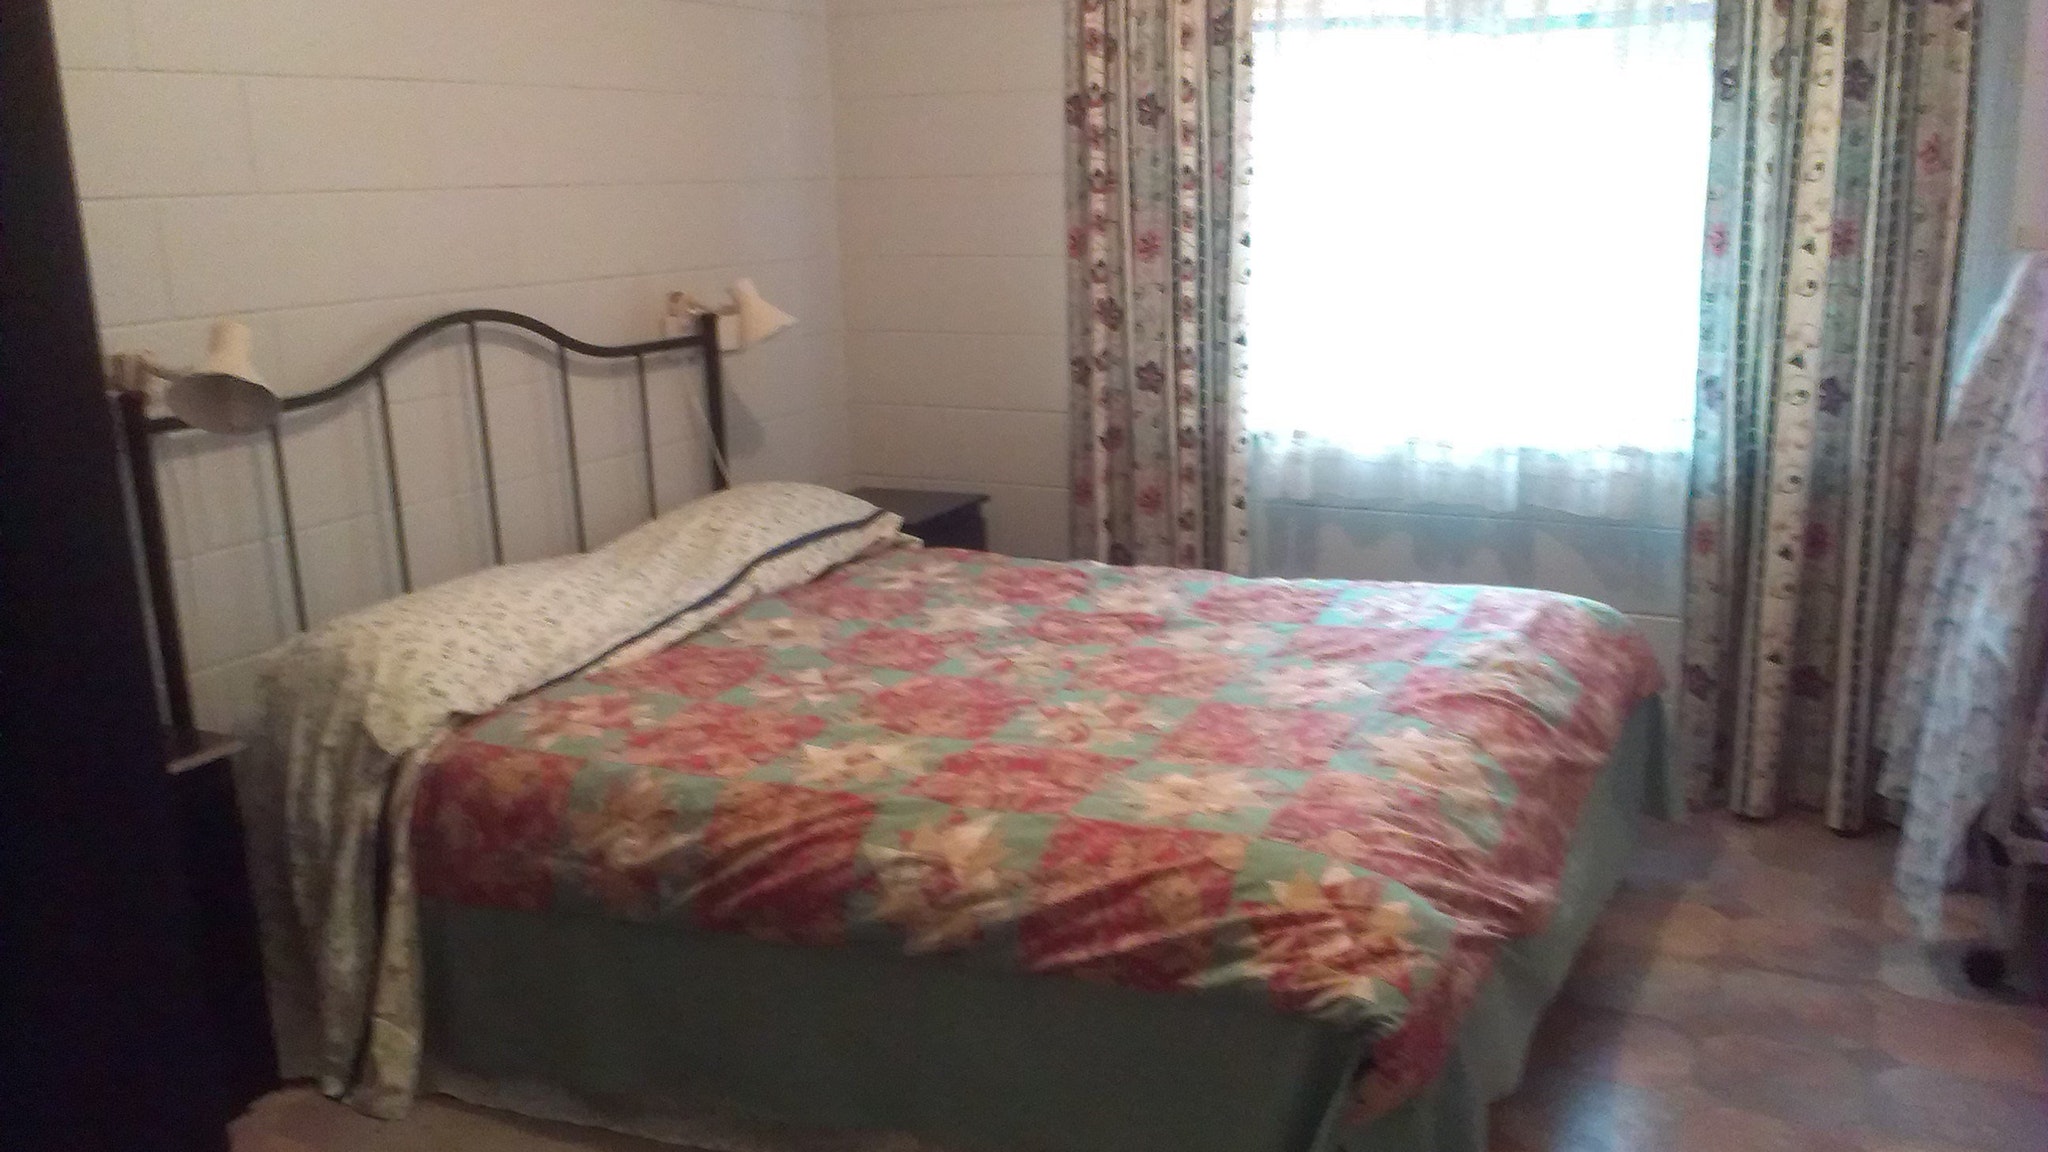 South Australian Country Women's Association Barmera Holiday Cottage - Melbourne Tourism